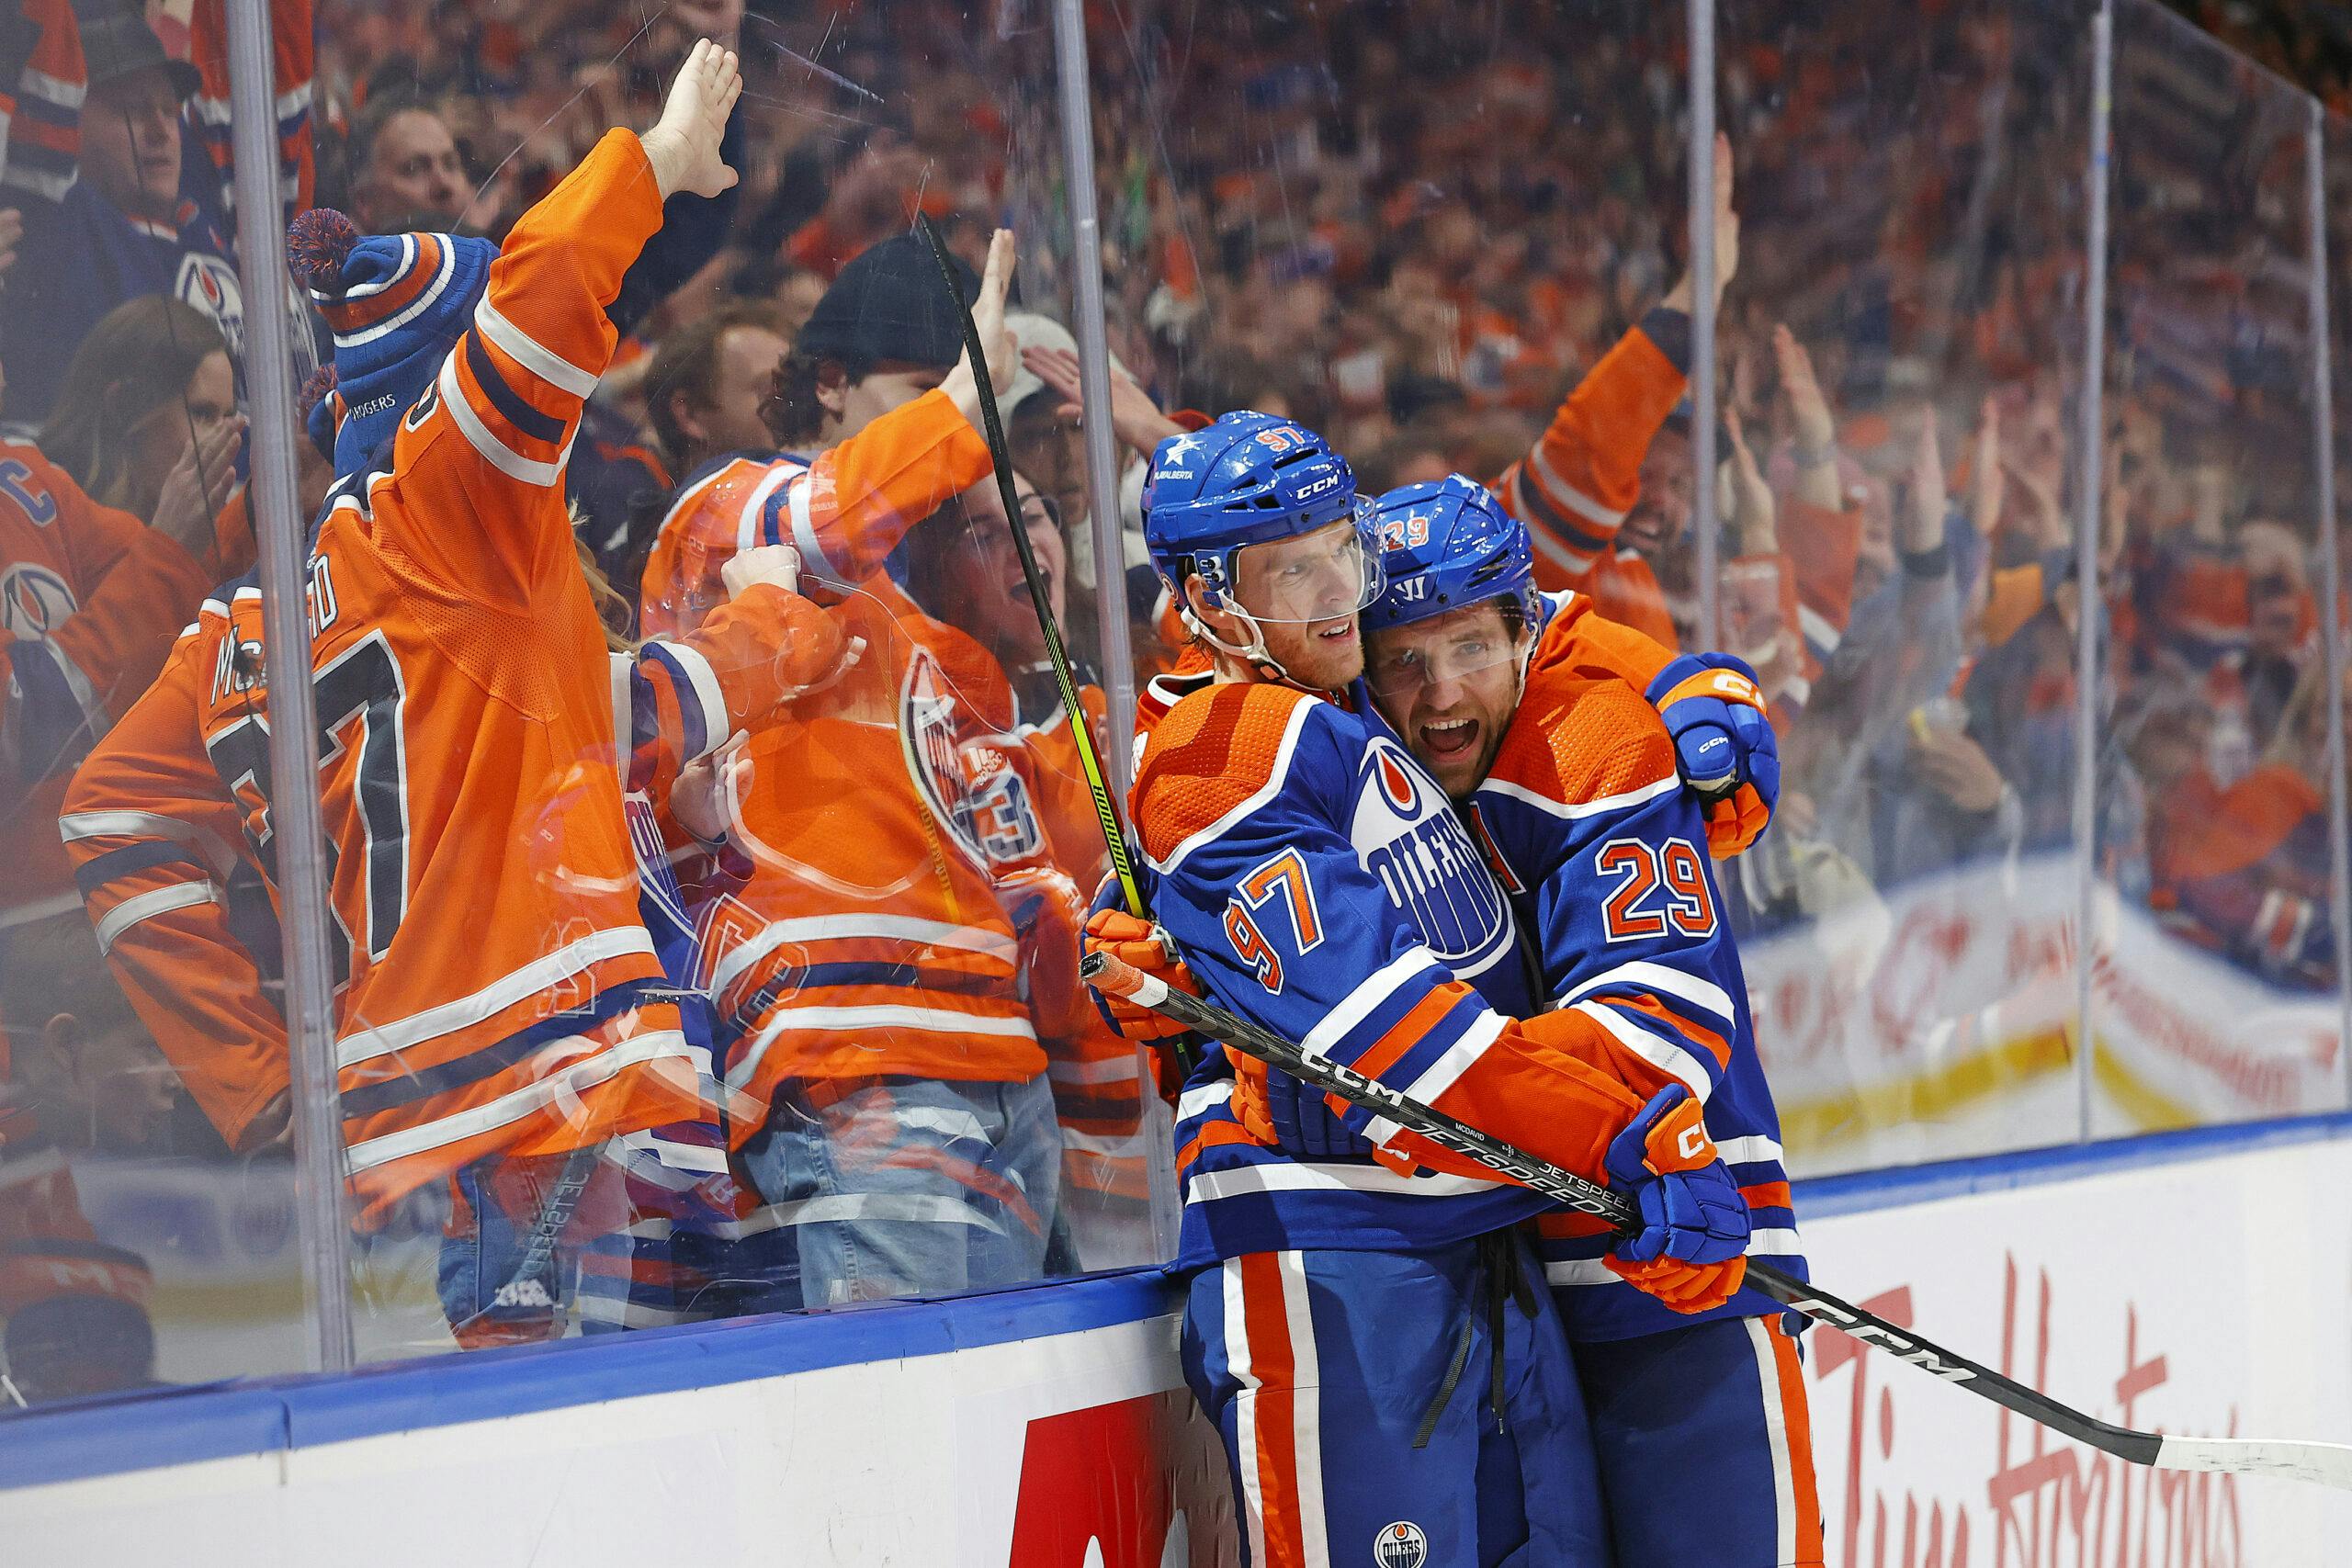 GDB 50.0 Wrap Up: Way she goes sometimes, Oilers' winning streak ends with  7-3 loss to the Wild - OilersNation